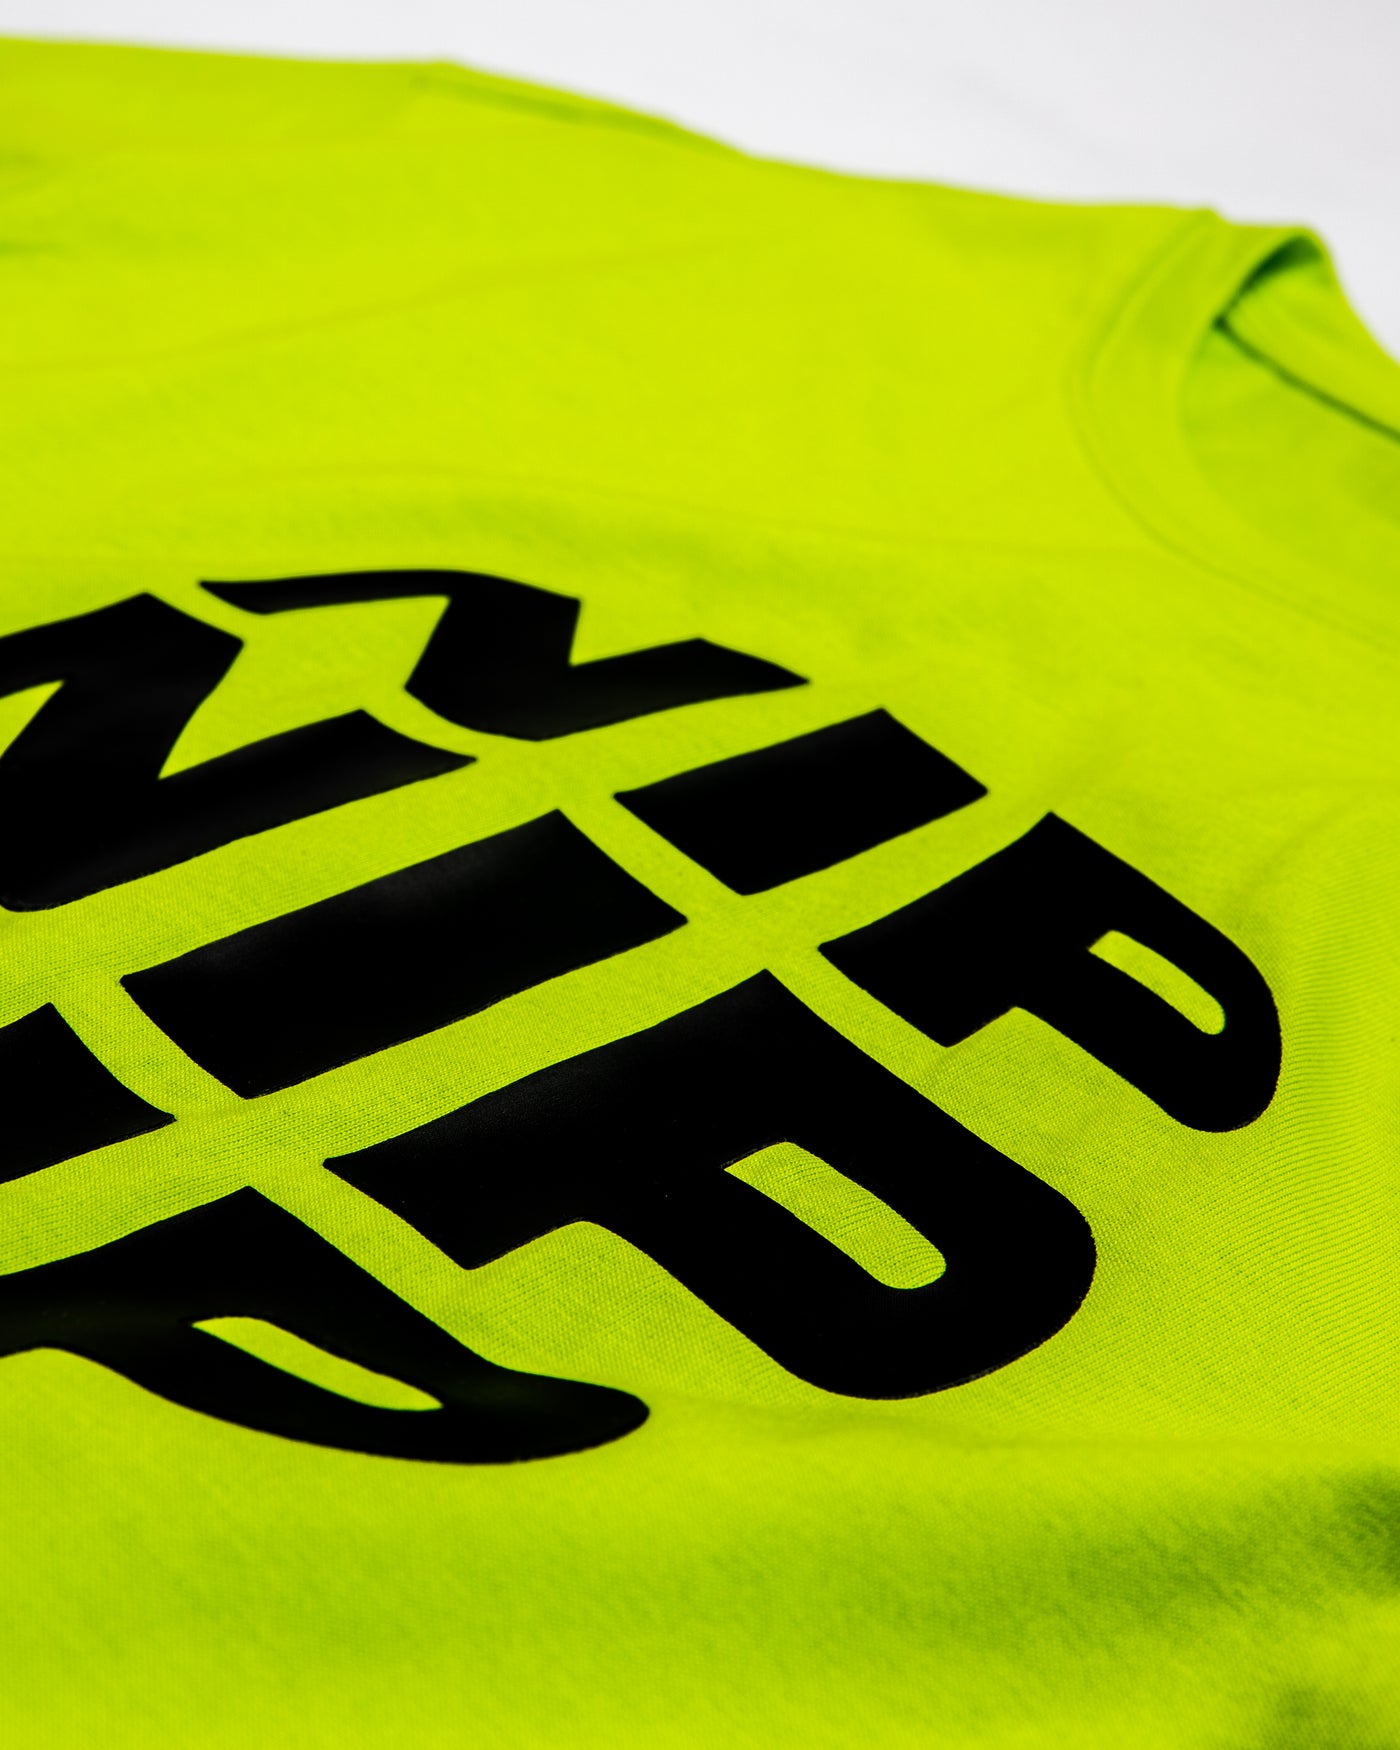 Ninjutsu Collection - Neon Yellow T-Shirt from Ninjas in Pyjamas Shop. A neon yellow t-shirt from the Ninjutsu Merch Collection, with the Ninjas in Pyjamas logo subtly printed on the front. This vibrant and trendy t-shirt is perfect for making a bold statement and showcasing your support for the NIP in a stylish and eye-catching way.